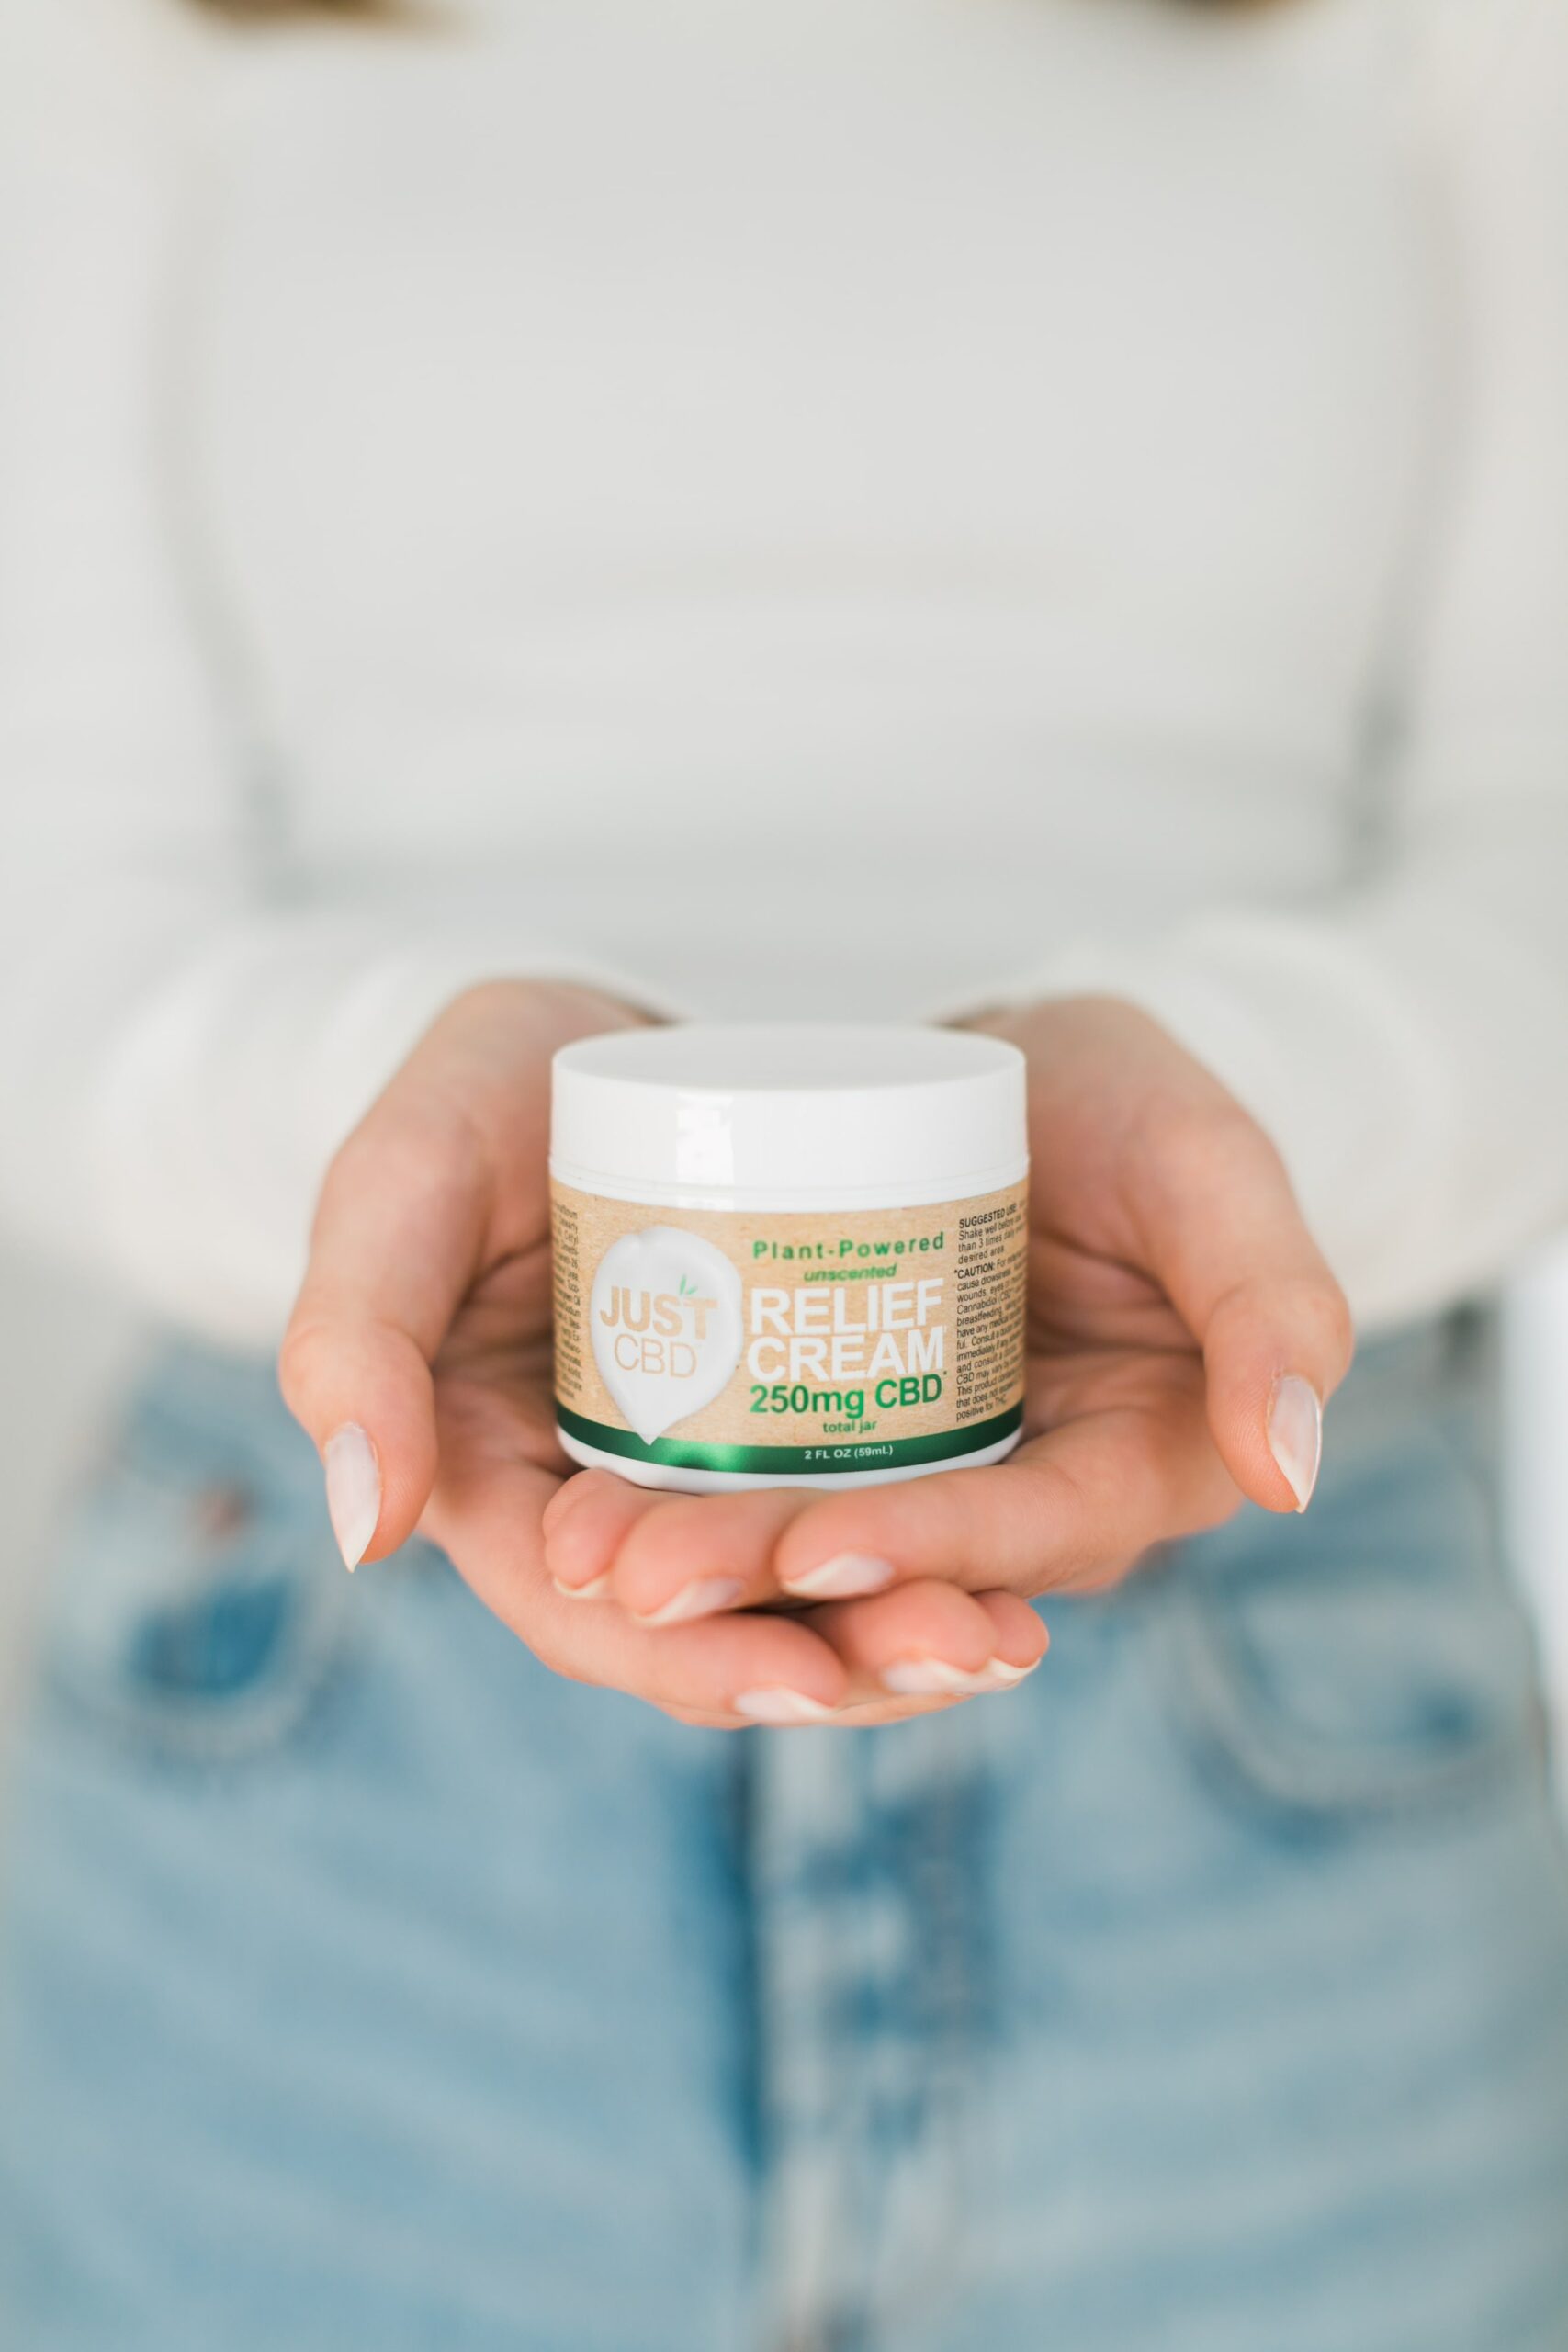 CBD CREAMS AND LOTIONS; ARE THEY AN OPTION FOR PEOPLE SUFFERING FROM ATOPIC DERMATITIS (ECZEMA)